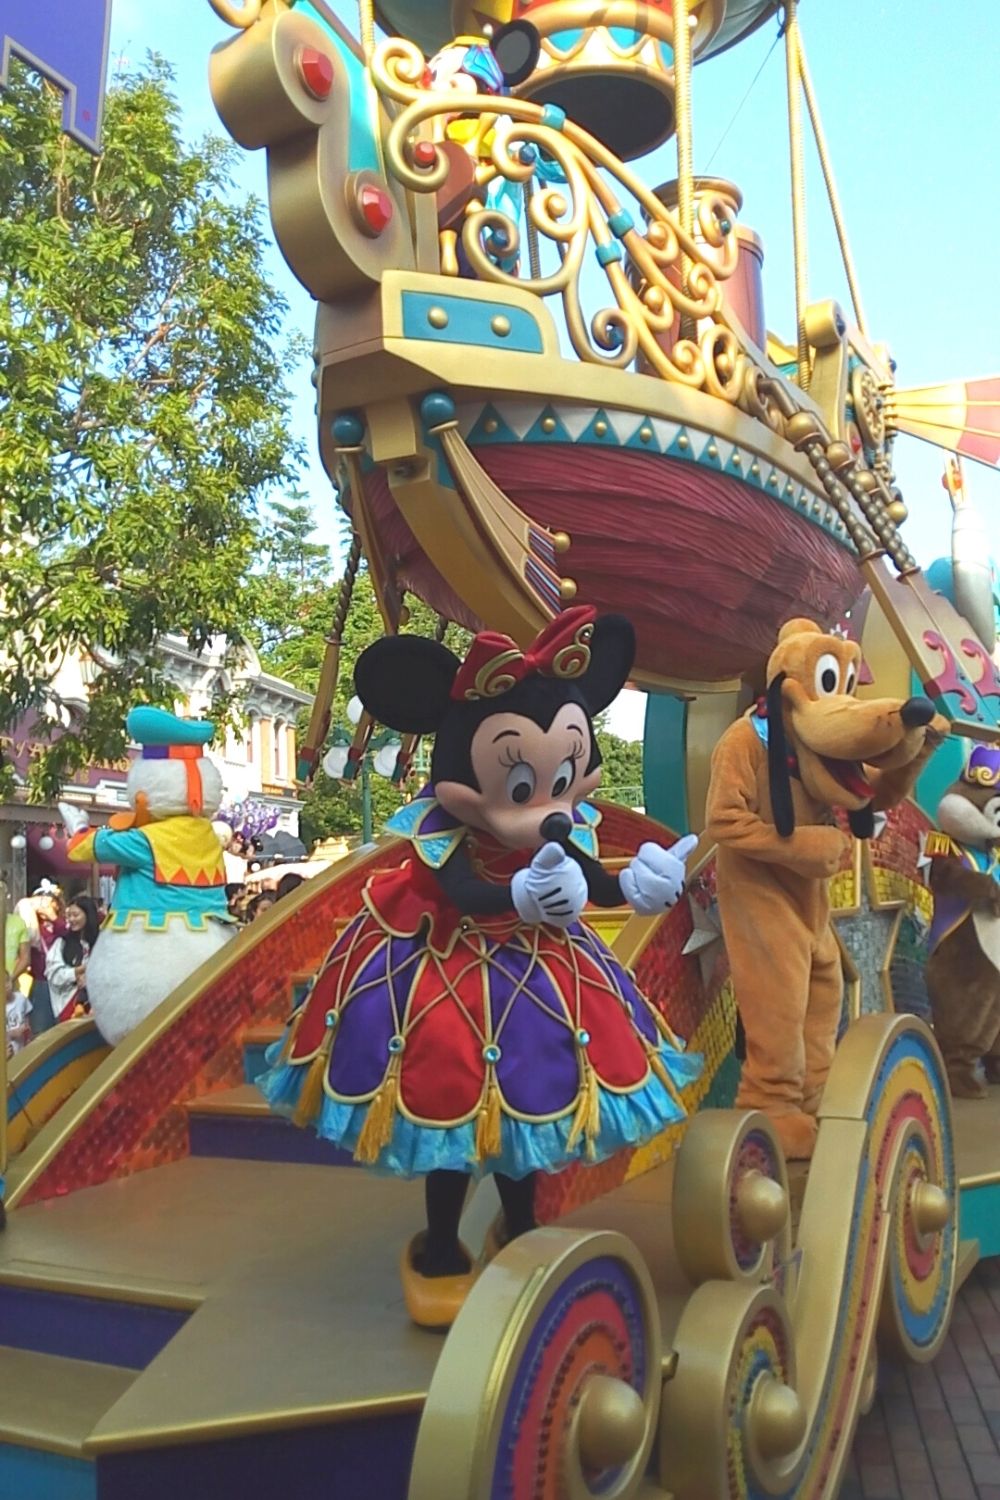 Minnie Mouse and Pluto on a parade float at Disney's theme park